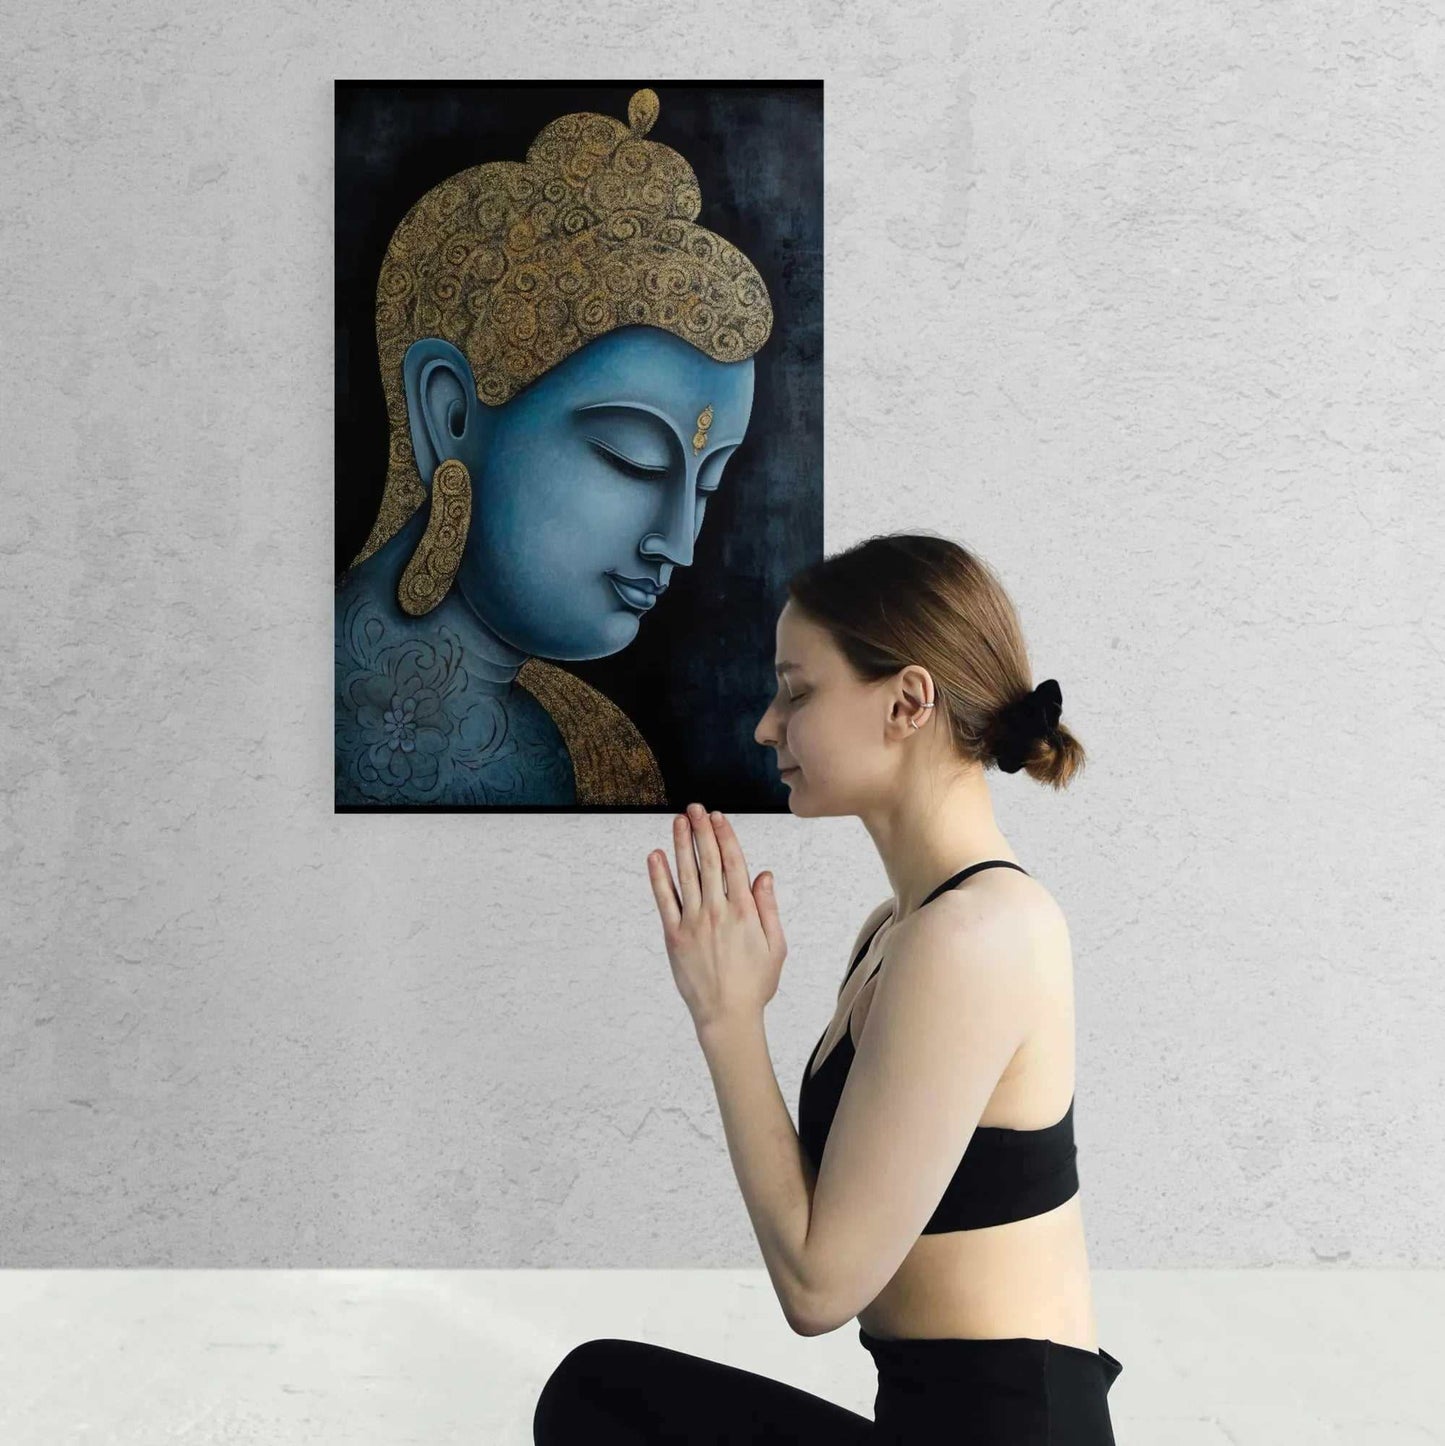 A woman practicing meditation in front of a tranquil blue and gold Buddha painting, promoting a sense of peace and mindfulness.